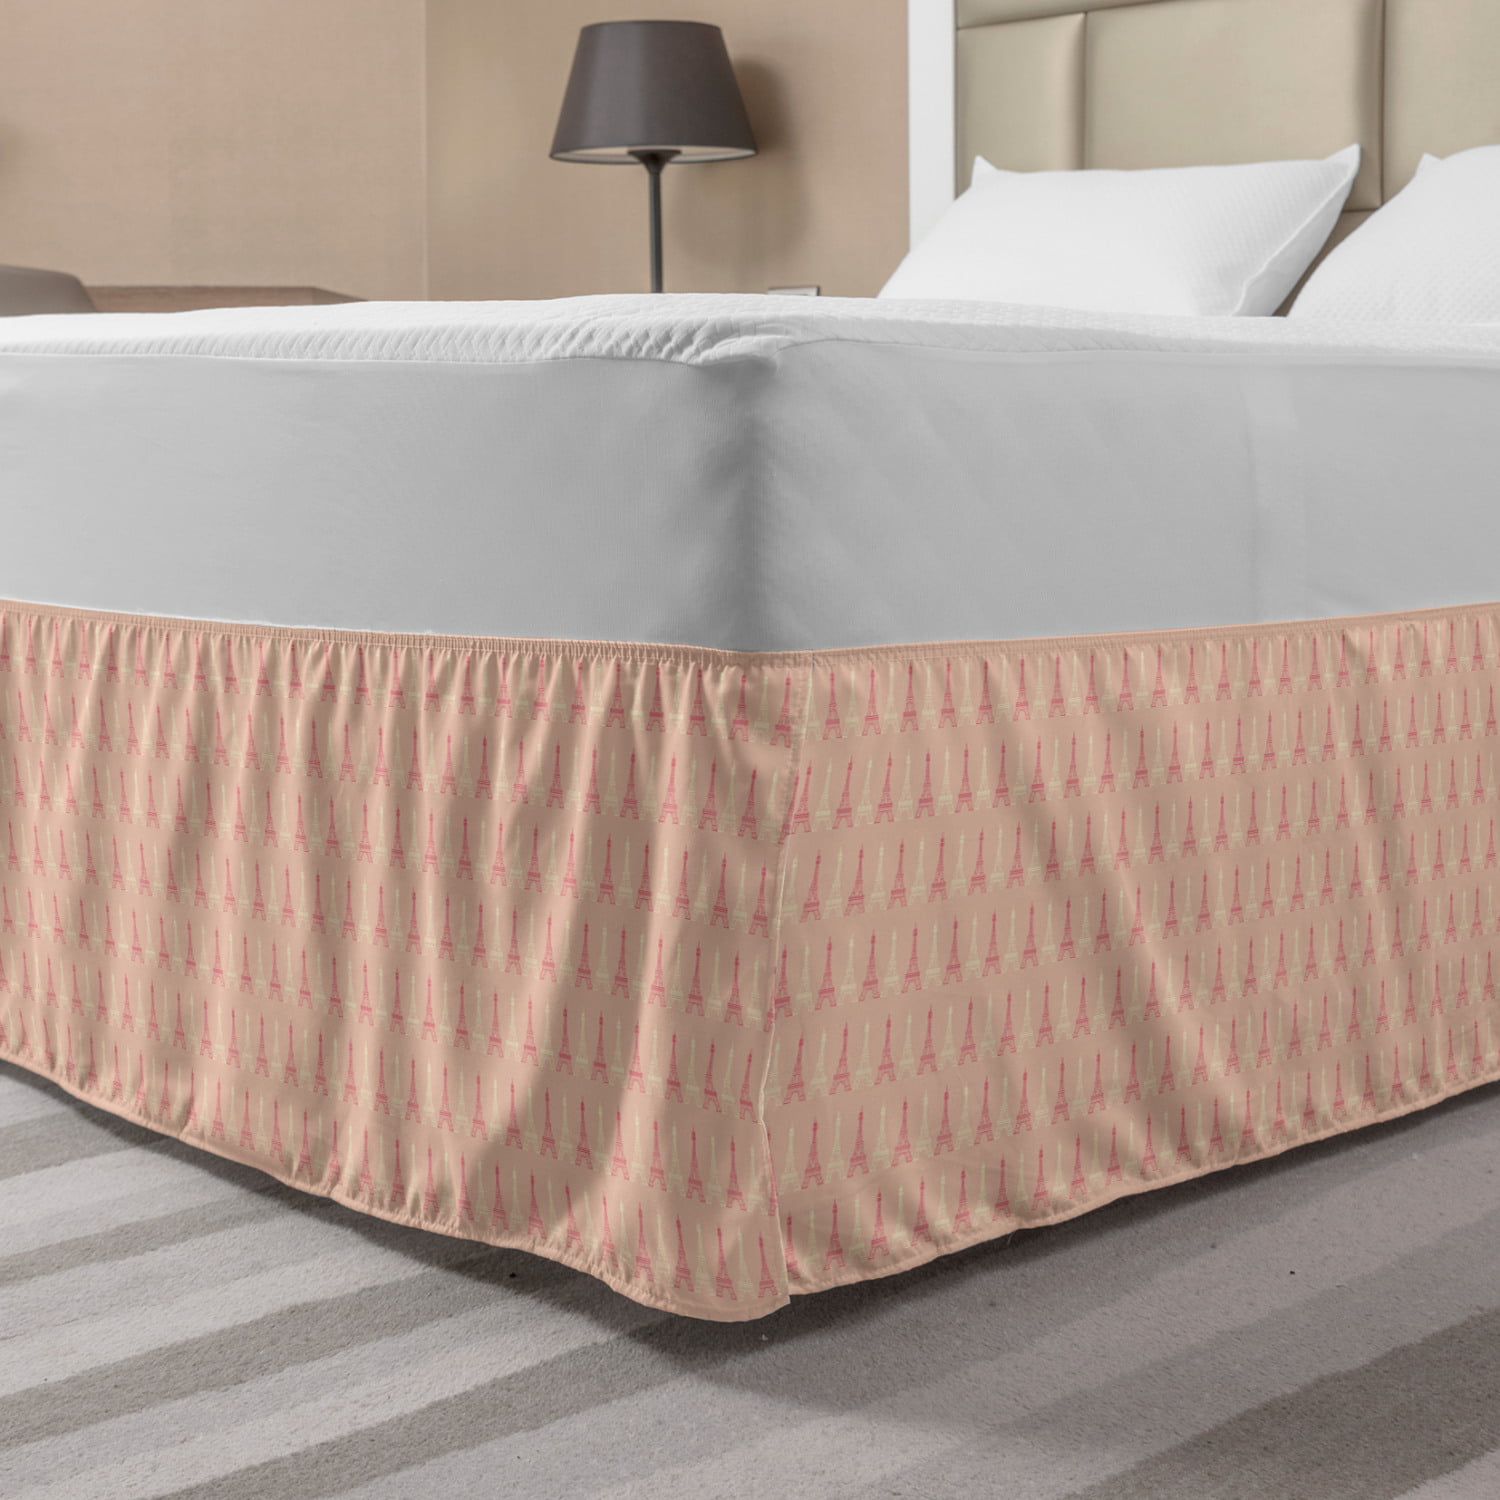 NEW 1PC ELASTIC ALL AROUND STYLE BEDDING DRESSING BED SOLID SKIRT 14" DROP 